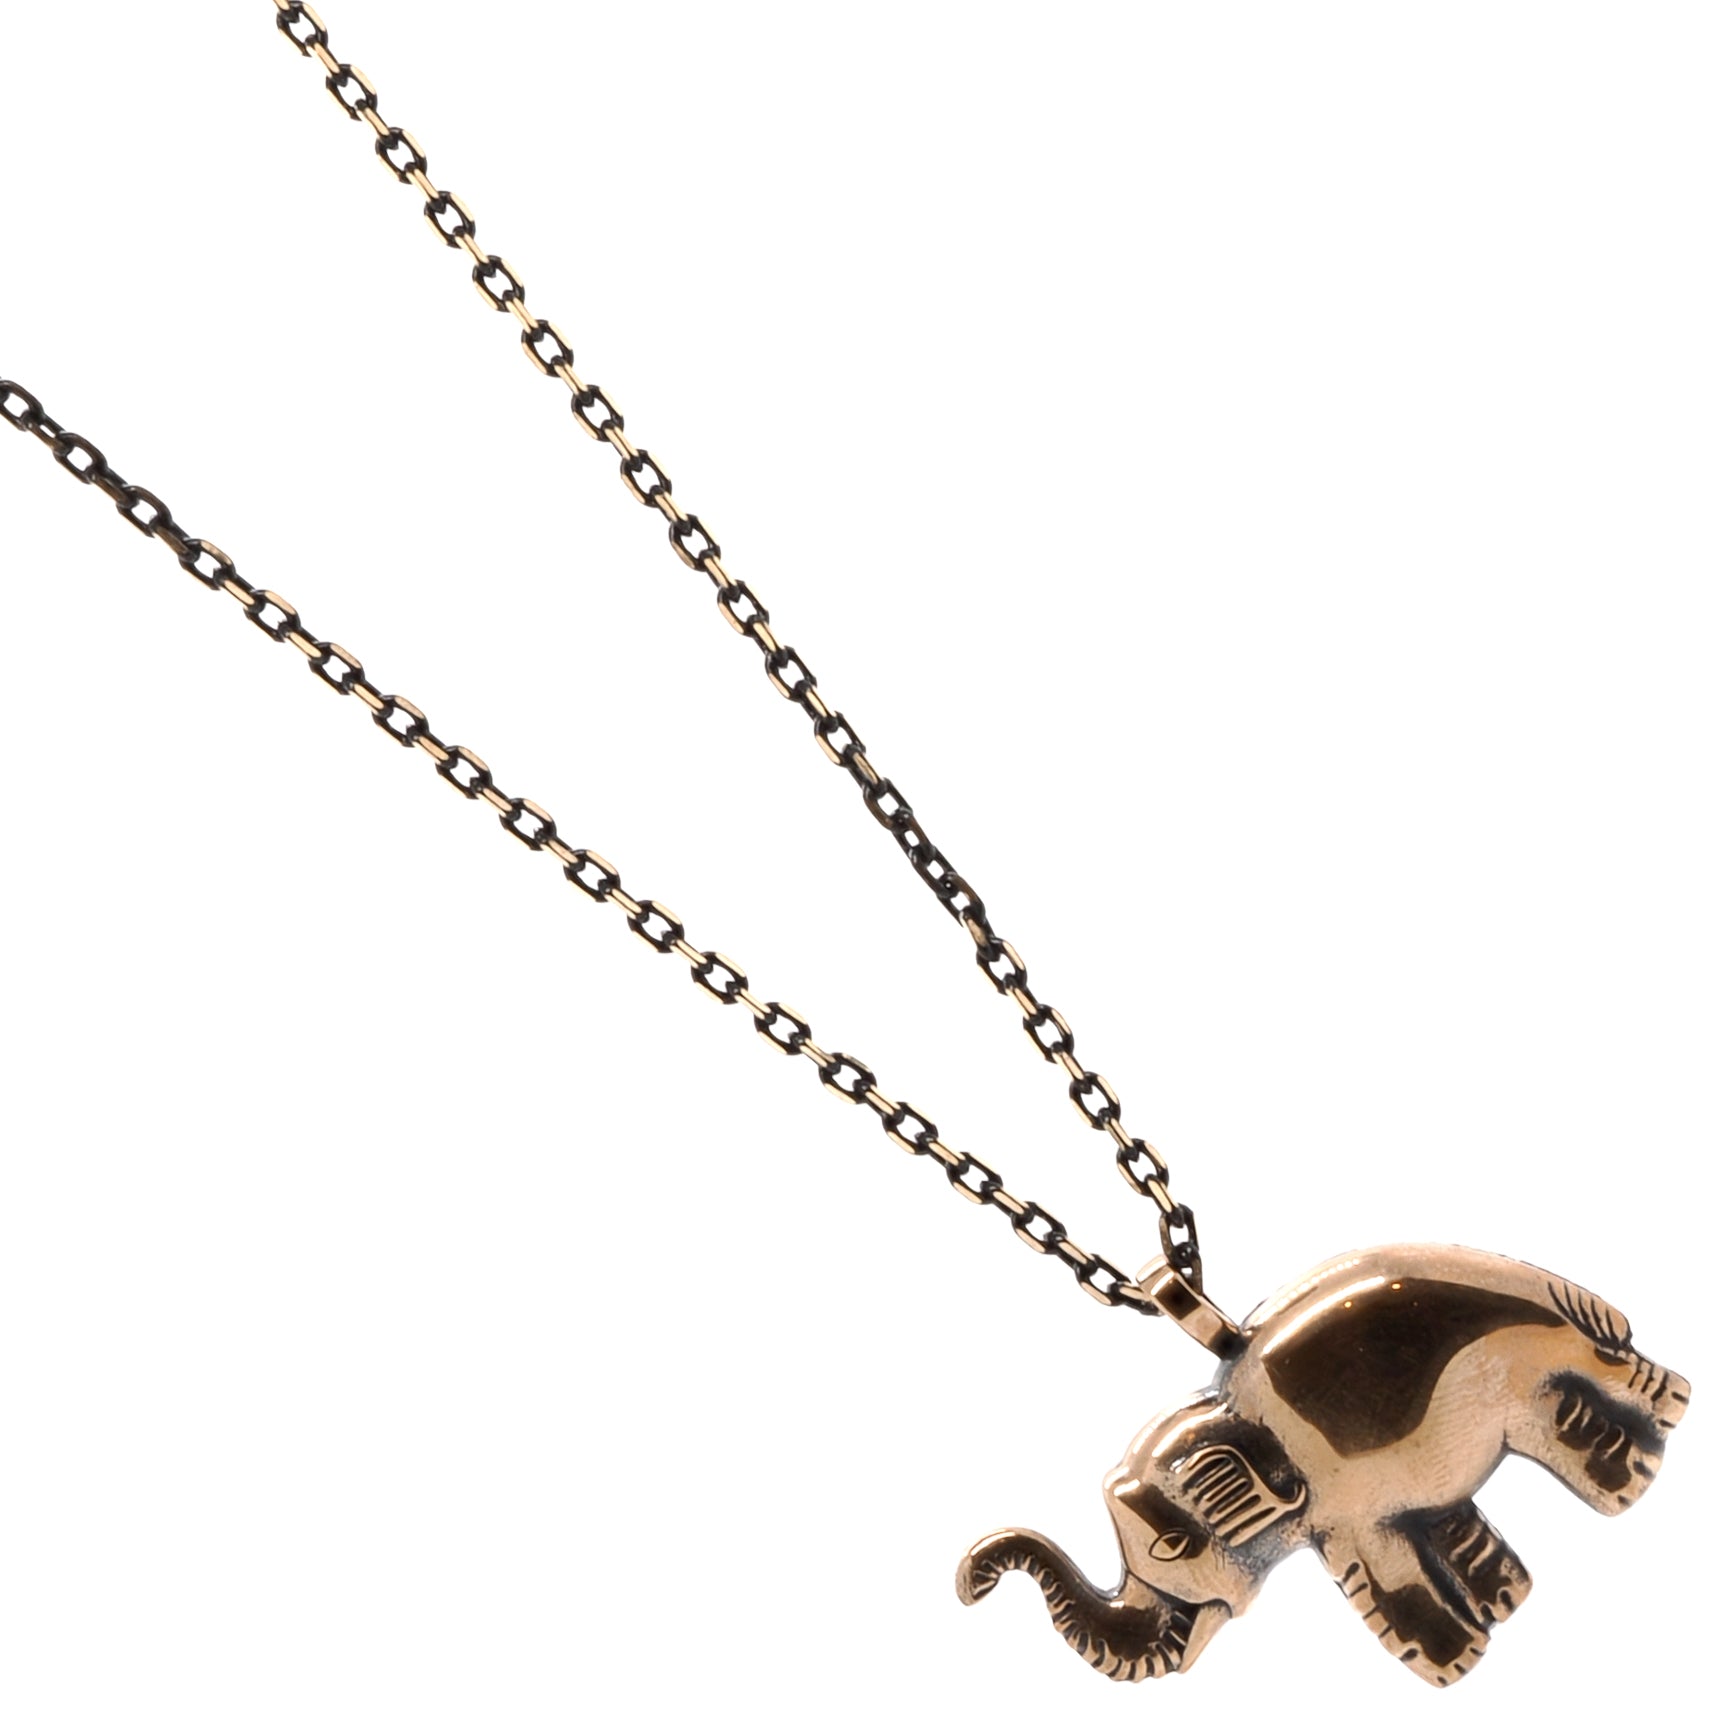 Elegant and Symbolic - The Symbol of Luck Elephant Necklace Adds a Touch of Grace to Your Style.